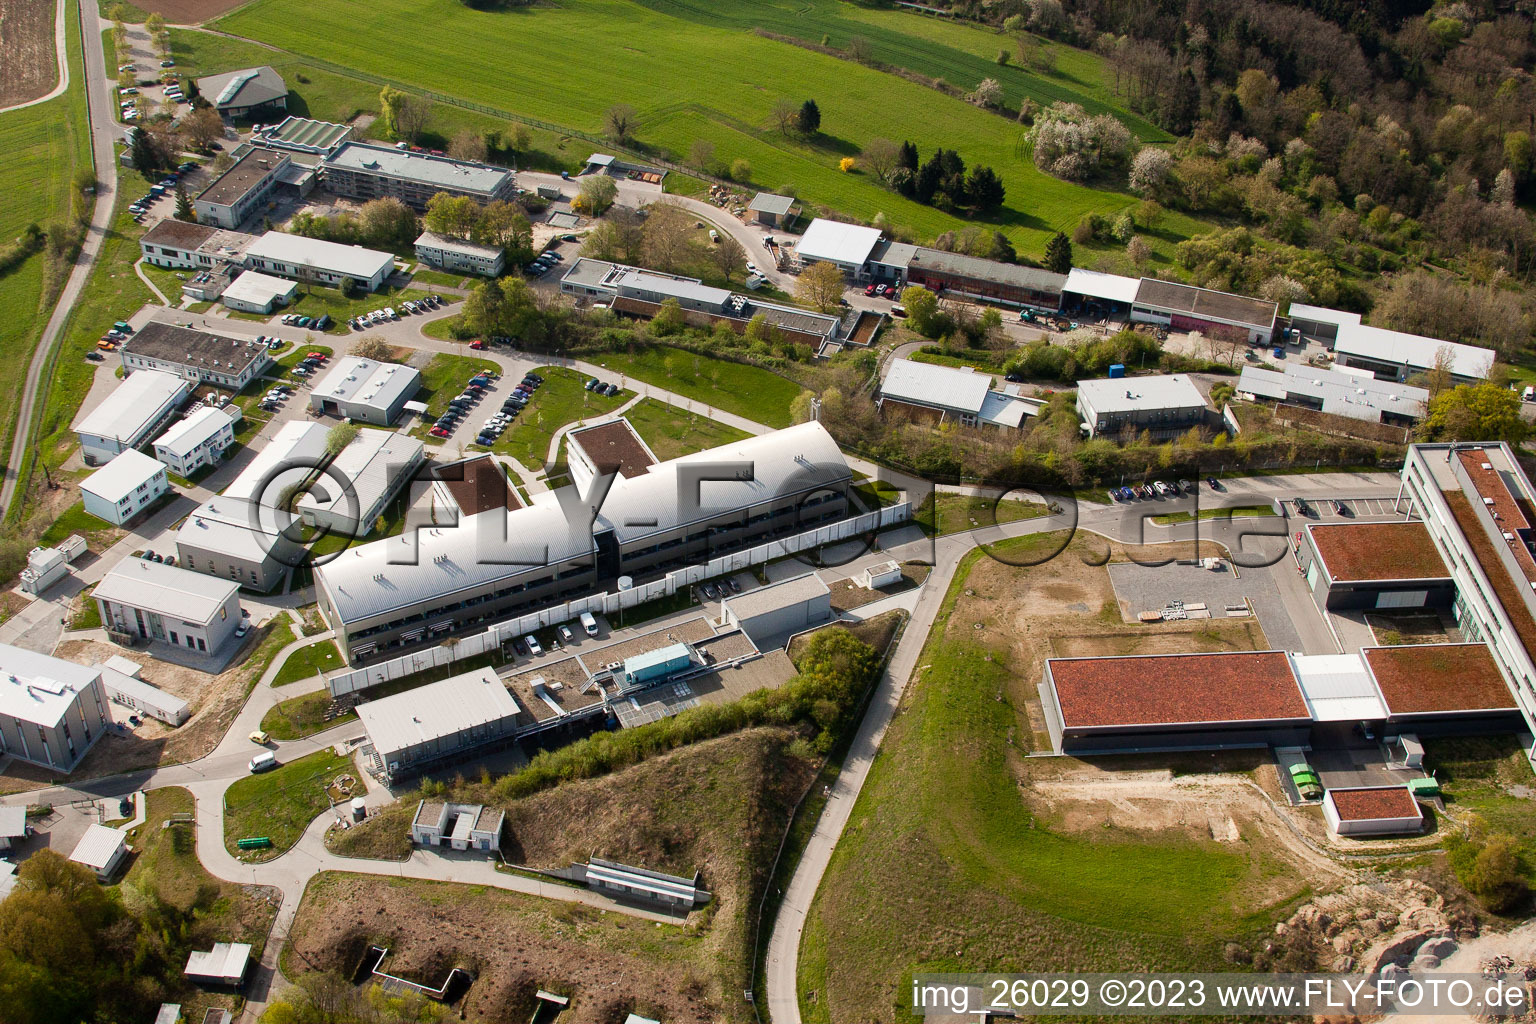 Pfinztal, Fraunhofer Institute for Chemical Technology (ICT) in the district Grötzingen in Karlsruhe in the state Baden-Wuerttemberg, Germany viewn from the air